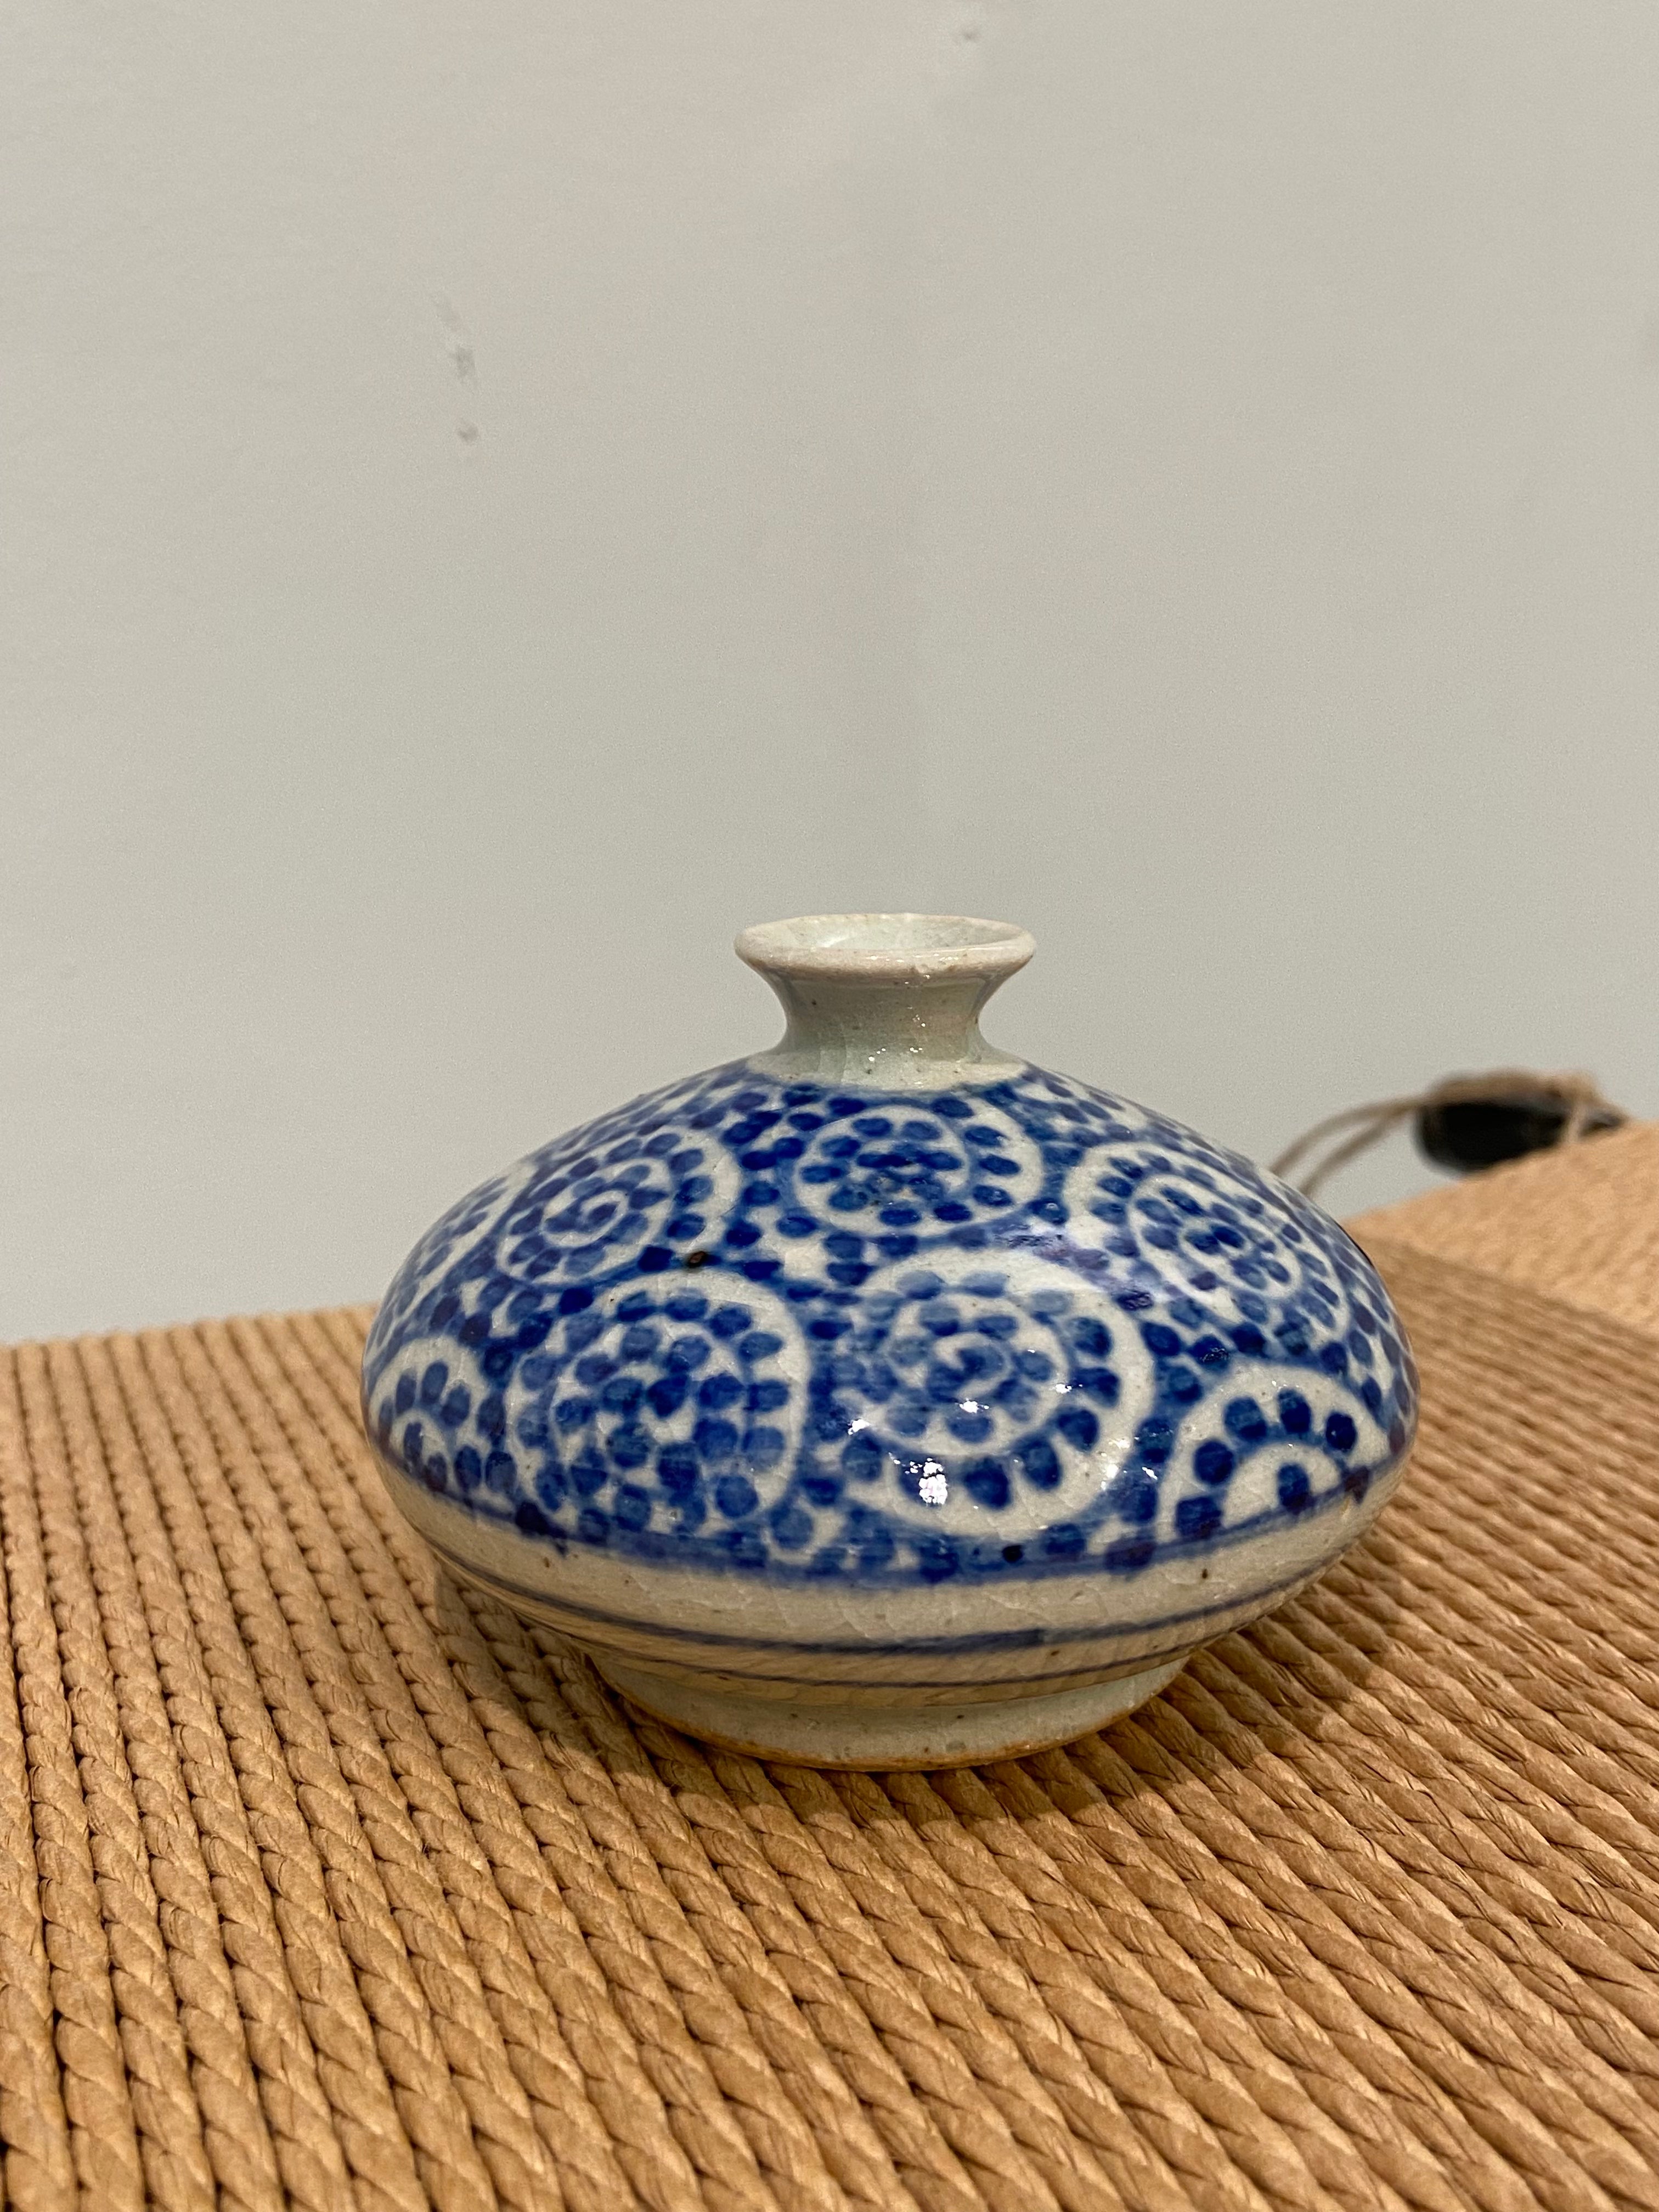 Small Japanese vase with pattern